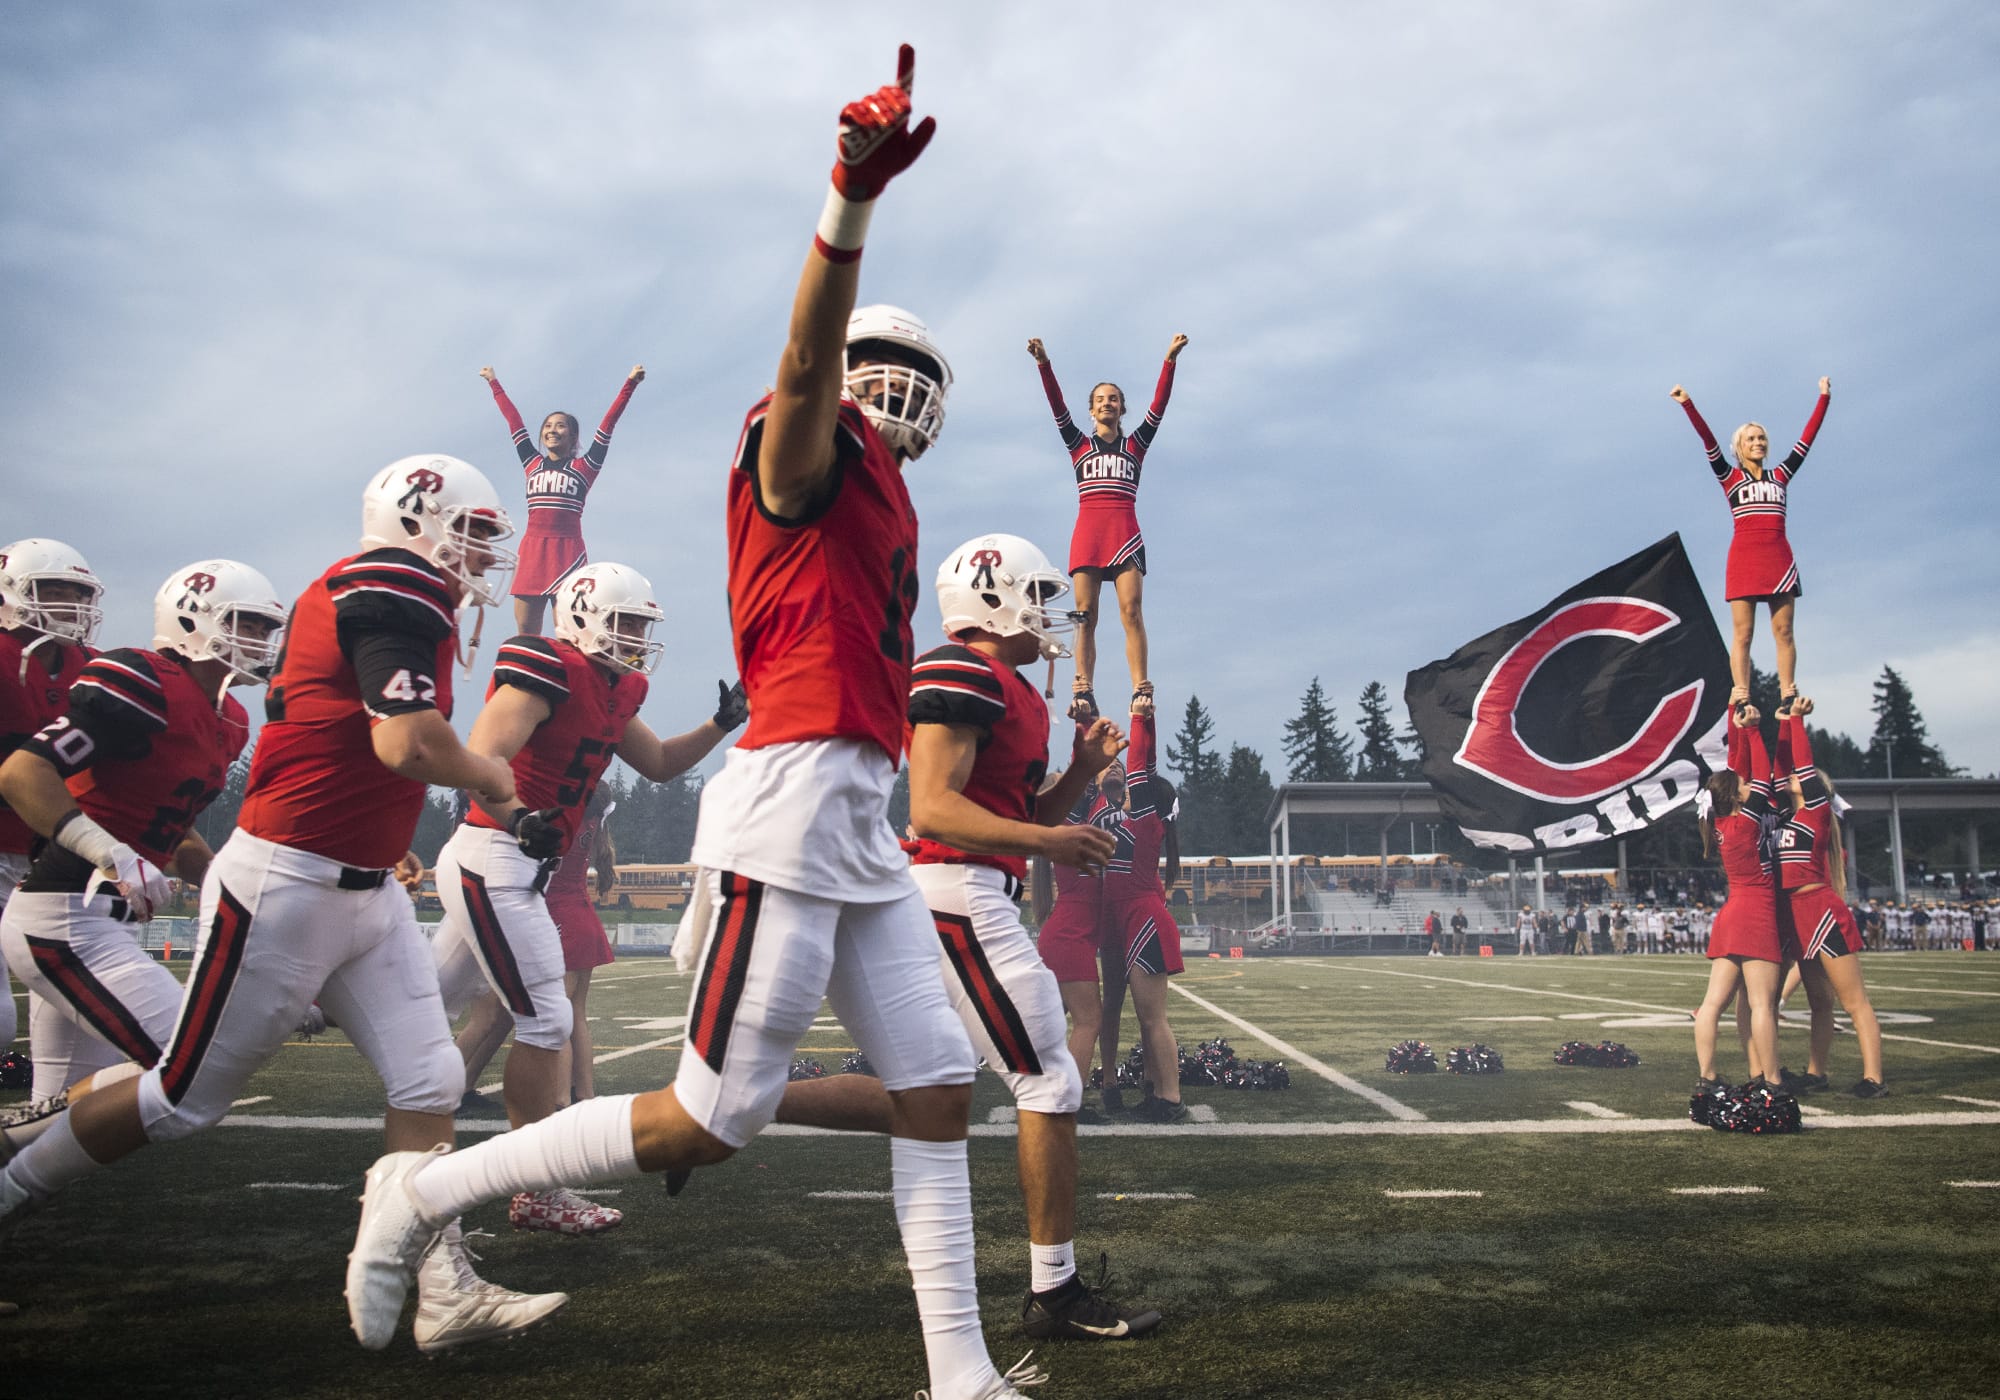 The Camas Papermakers run onto the field before Friday night's game against Bellevue at Doc Harris Stadium in Camas on Sept. 21, 2018.